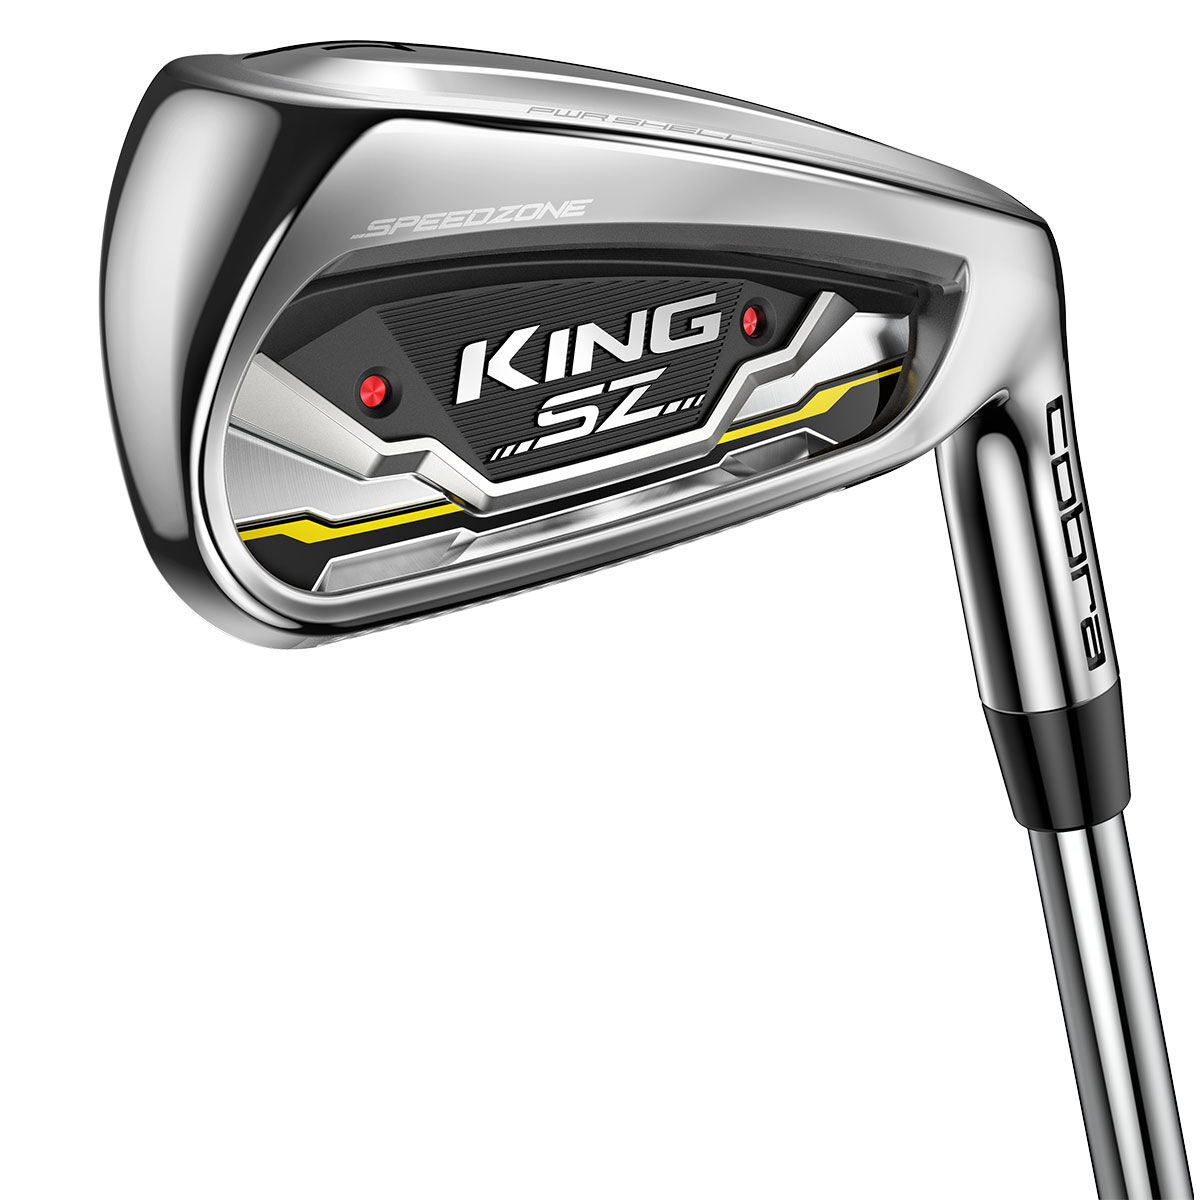 Cobra Golf Silver and Black Golf King SPEEDZONE-S Steel Right Hand 5-pw 6 Golf Irons | American Golf, One Size